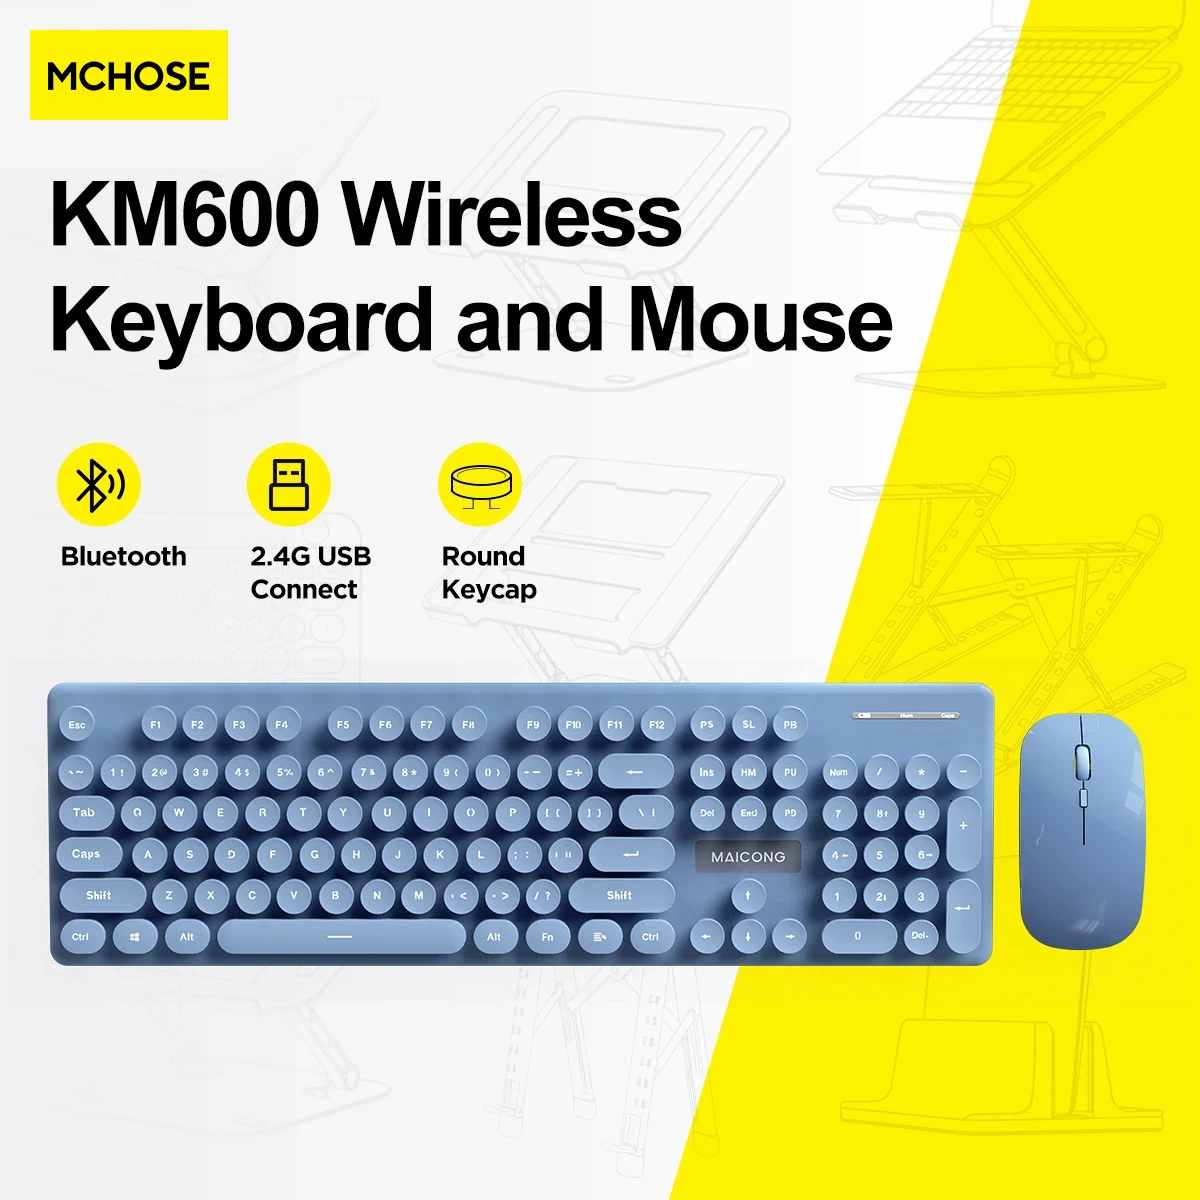 

MC KM600 Wireless Keyboard and Mouse Combo Bluetooth Full Size 104 Keys Keyboard and Portable Wireless Mouse for Windows PC iPad